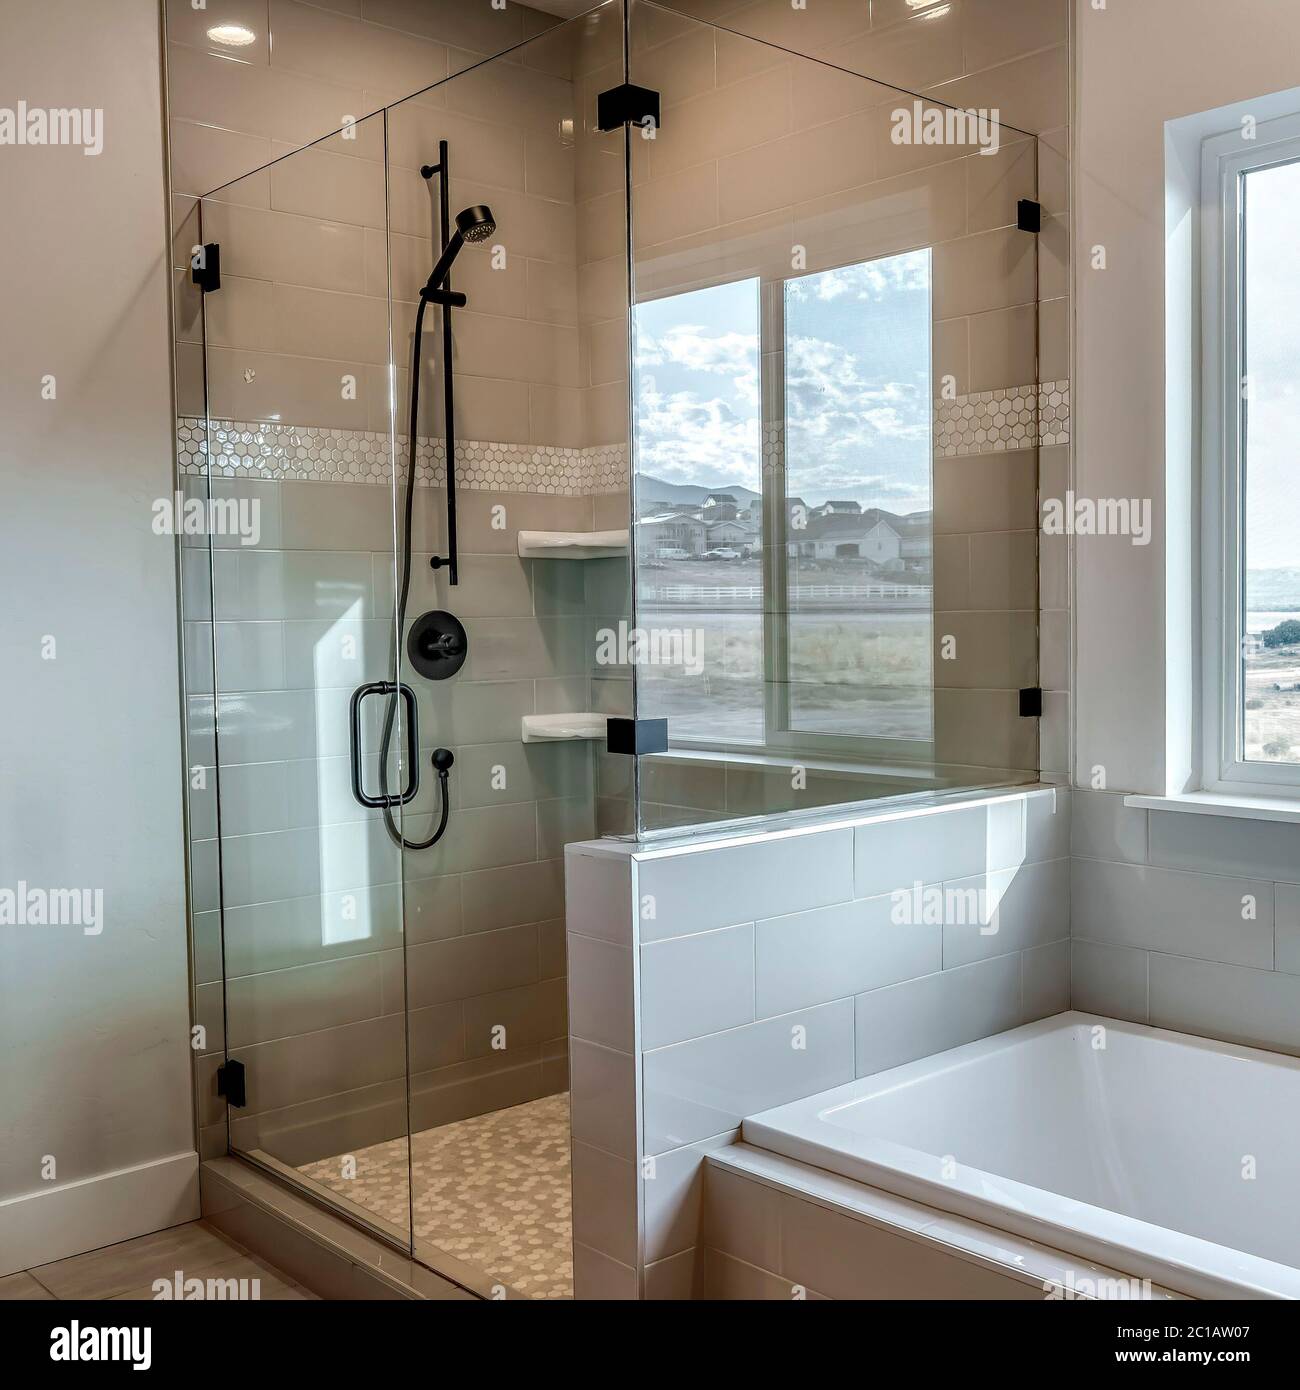 Square Rectangular walk in shower stall with half glass enclosure and black shower head Stock Photo